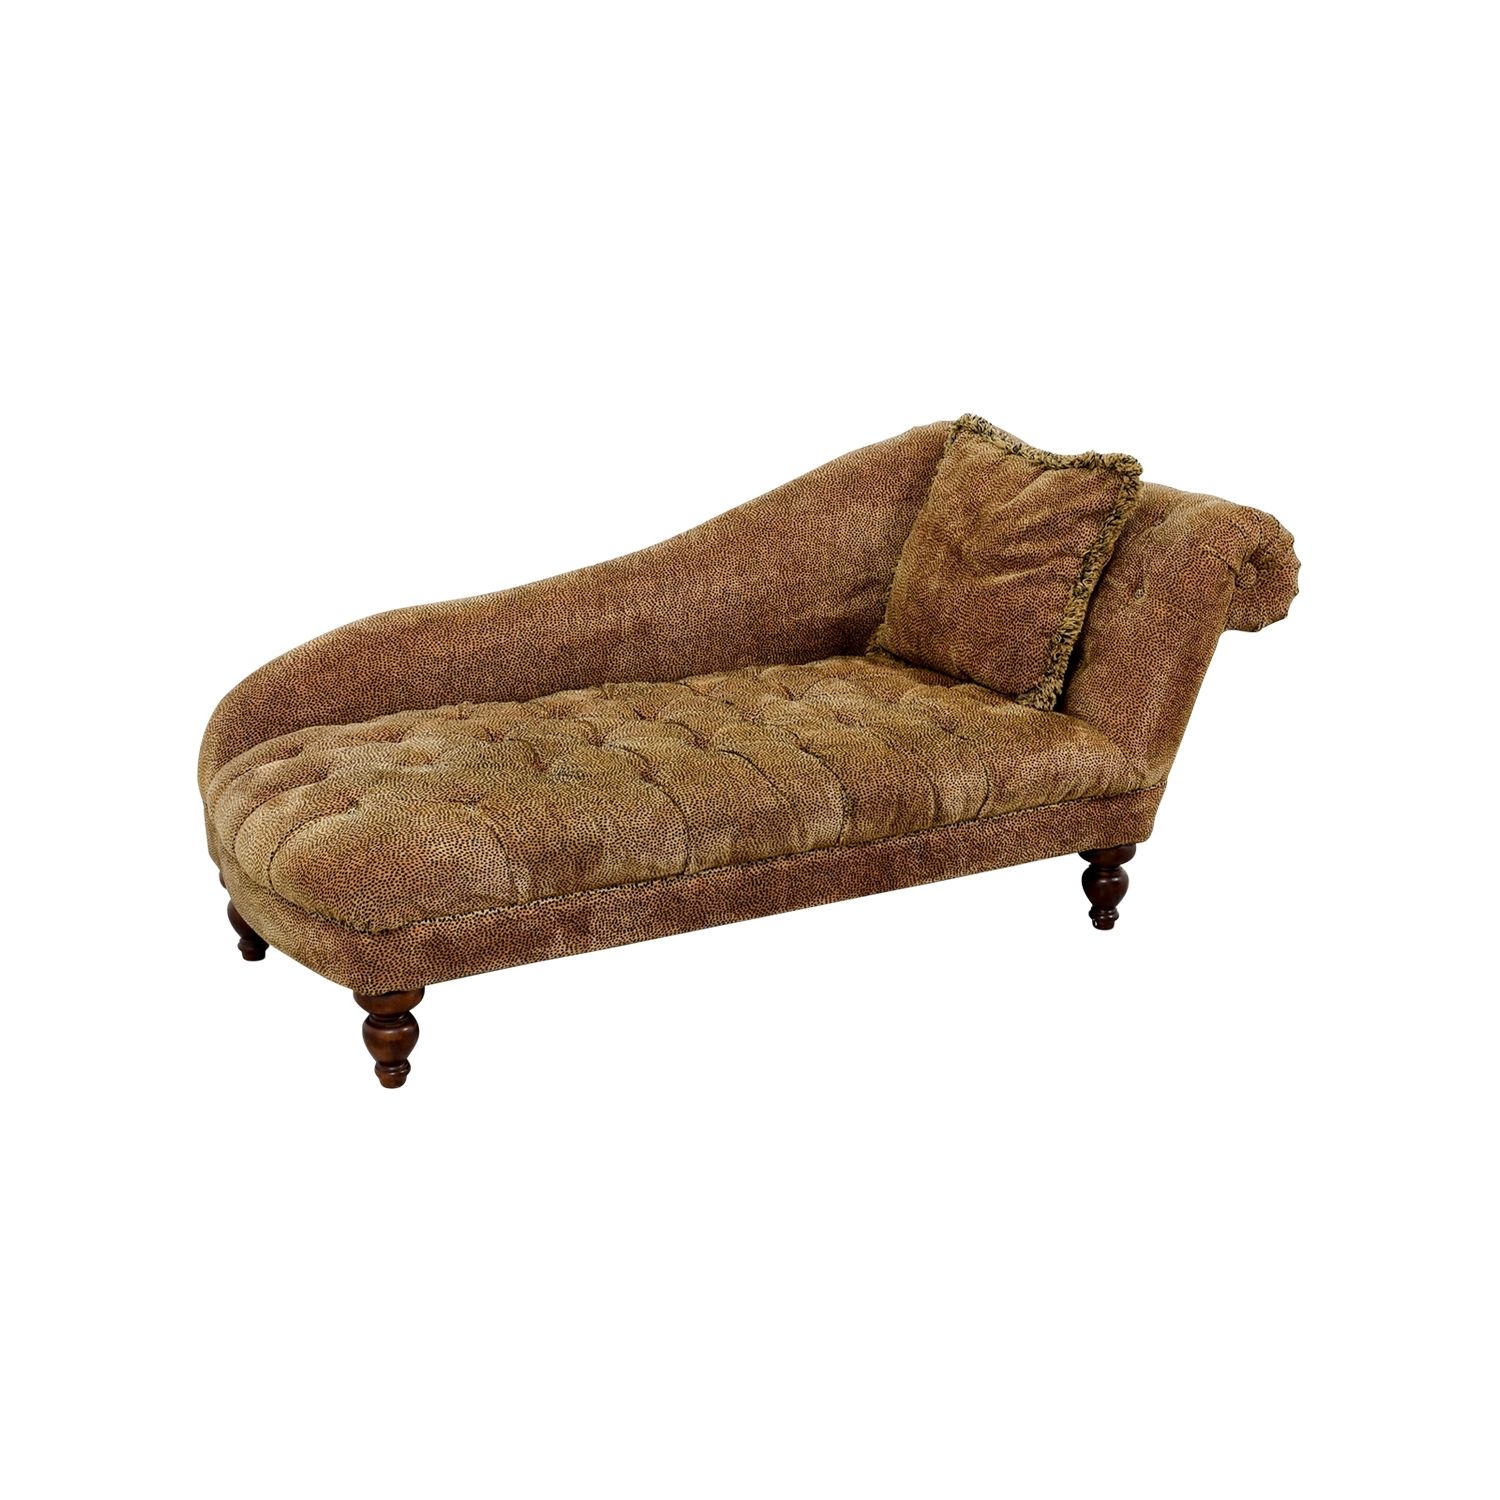 [%73% Off – Domain Home Furnishings Domain Home Furnishings Leopard Within Well Known Leopard Chaises|leopard Chaises Intended For Most Up To Date 73% Off – Domain Home Furnishings Domain Home Furnishings Leopard|most Recent Leopard Chaises In 73% Off – Domain Home Furnishings Domain Home Furnishings Leopard|latest 73% Off – Domain Home Furnishings Domain Home Furnishings Leopard In Leopard Chaises%] (View 4 of 15)